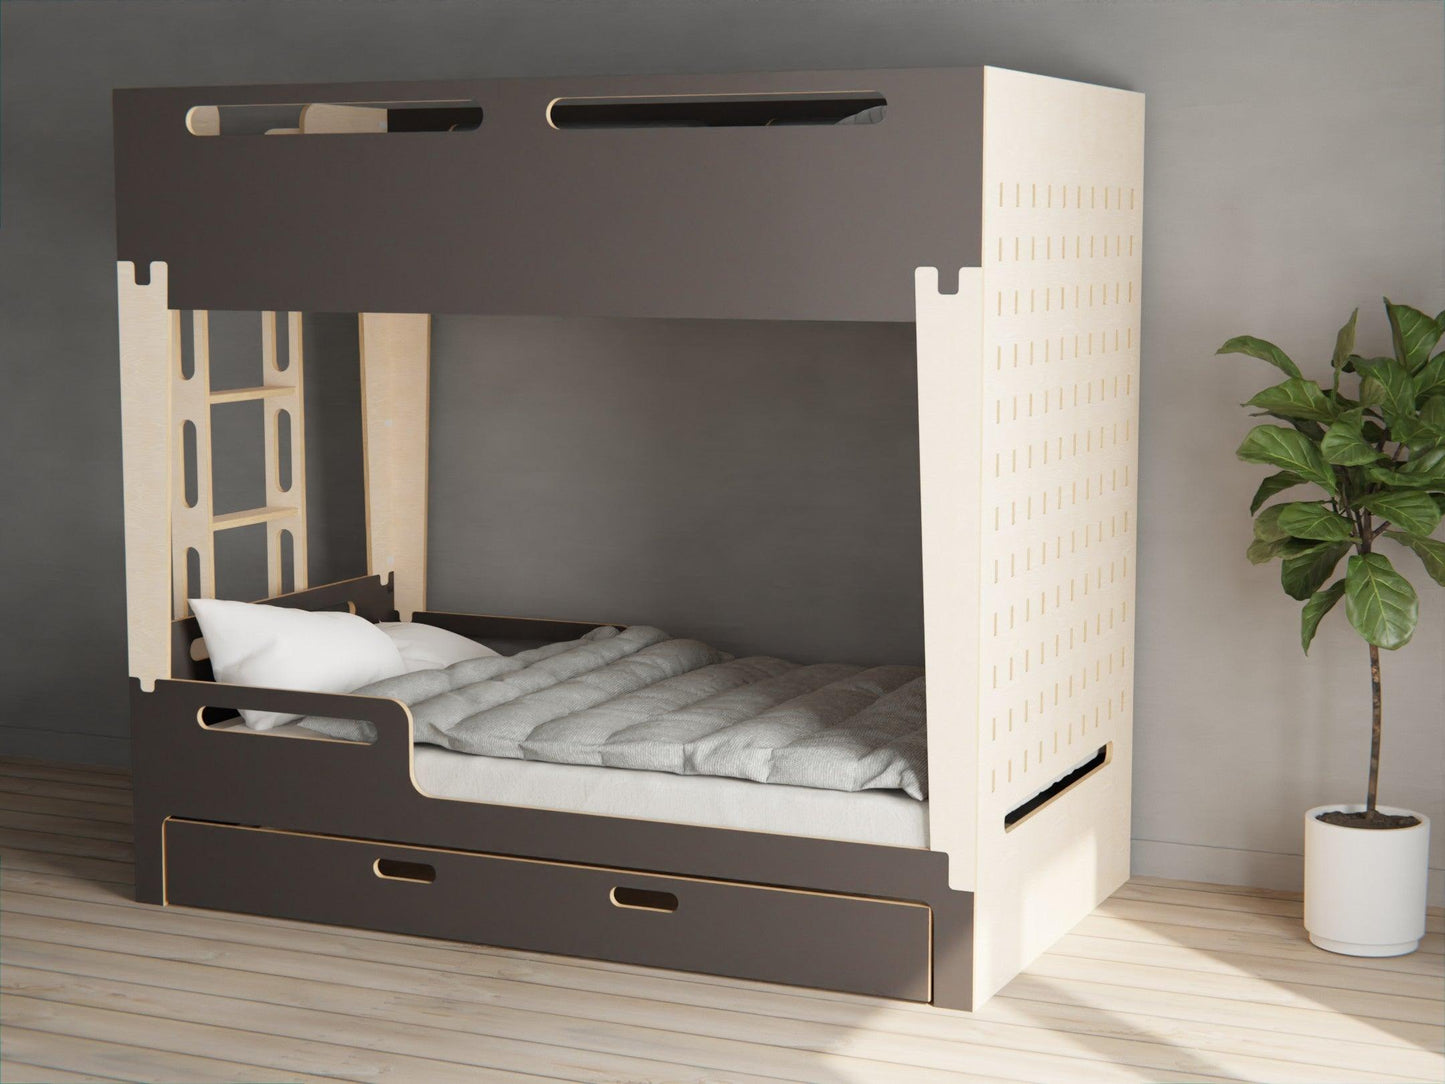 Embrace simplicity with our Scandinavian-style plywood bunk beds. Includes trundle bed in black colour.